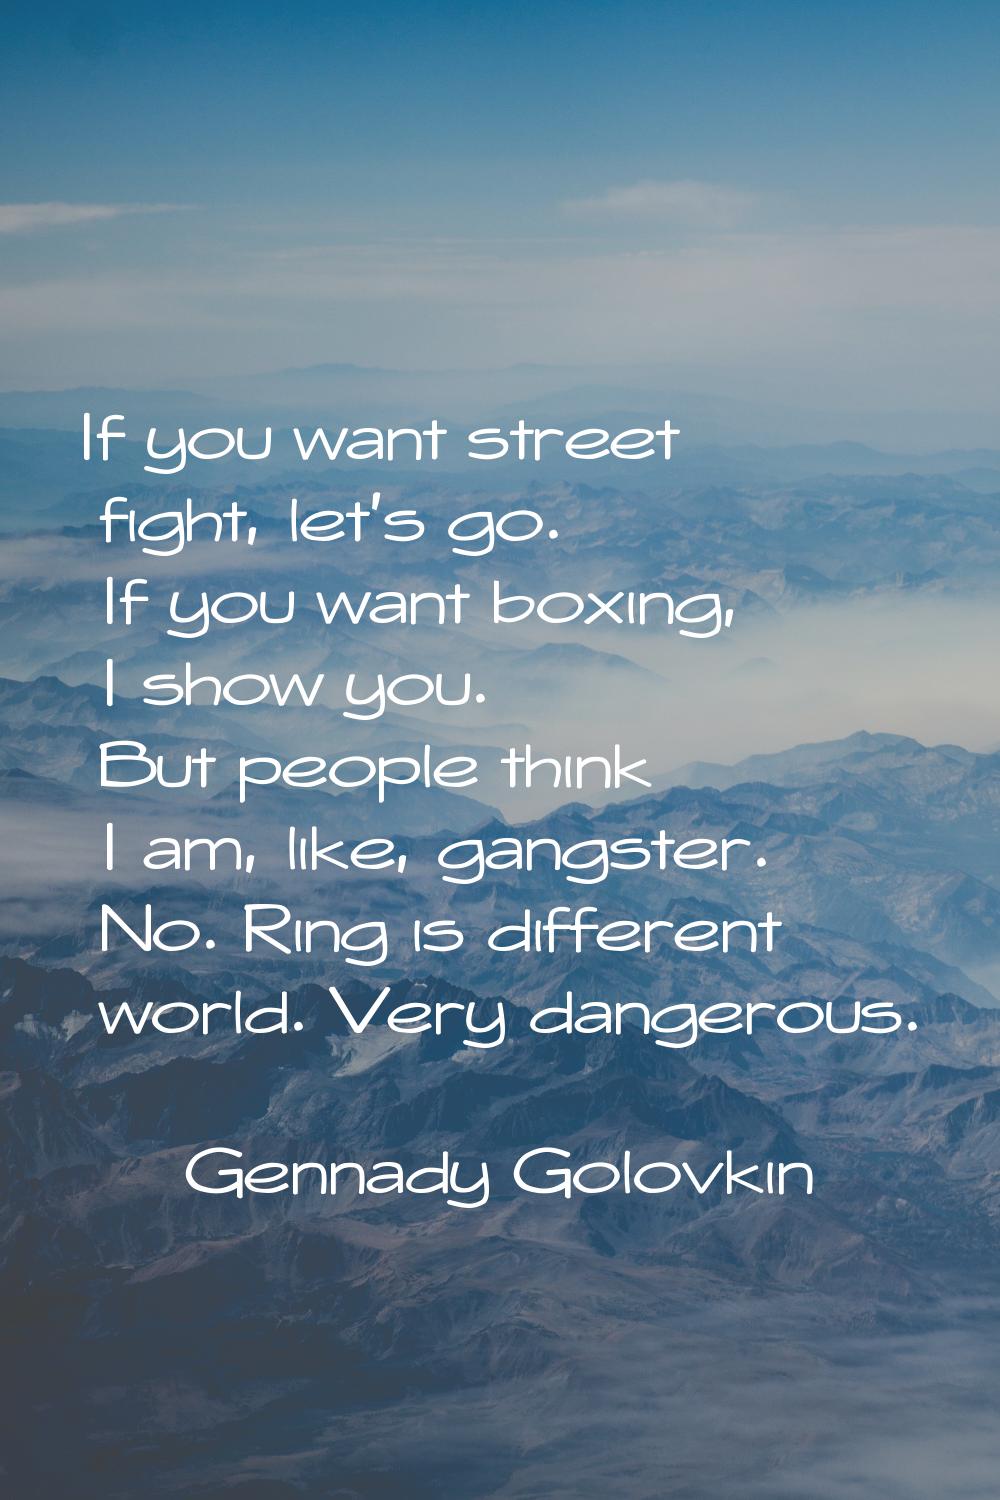 If you want street fight, let's go. If you want boxing, I show you. But people think I am, like, ga